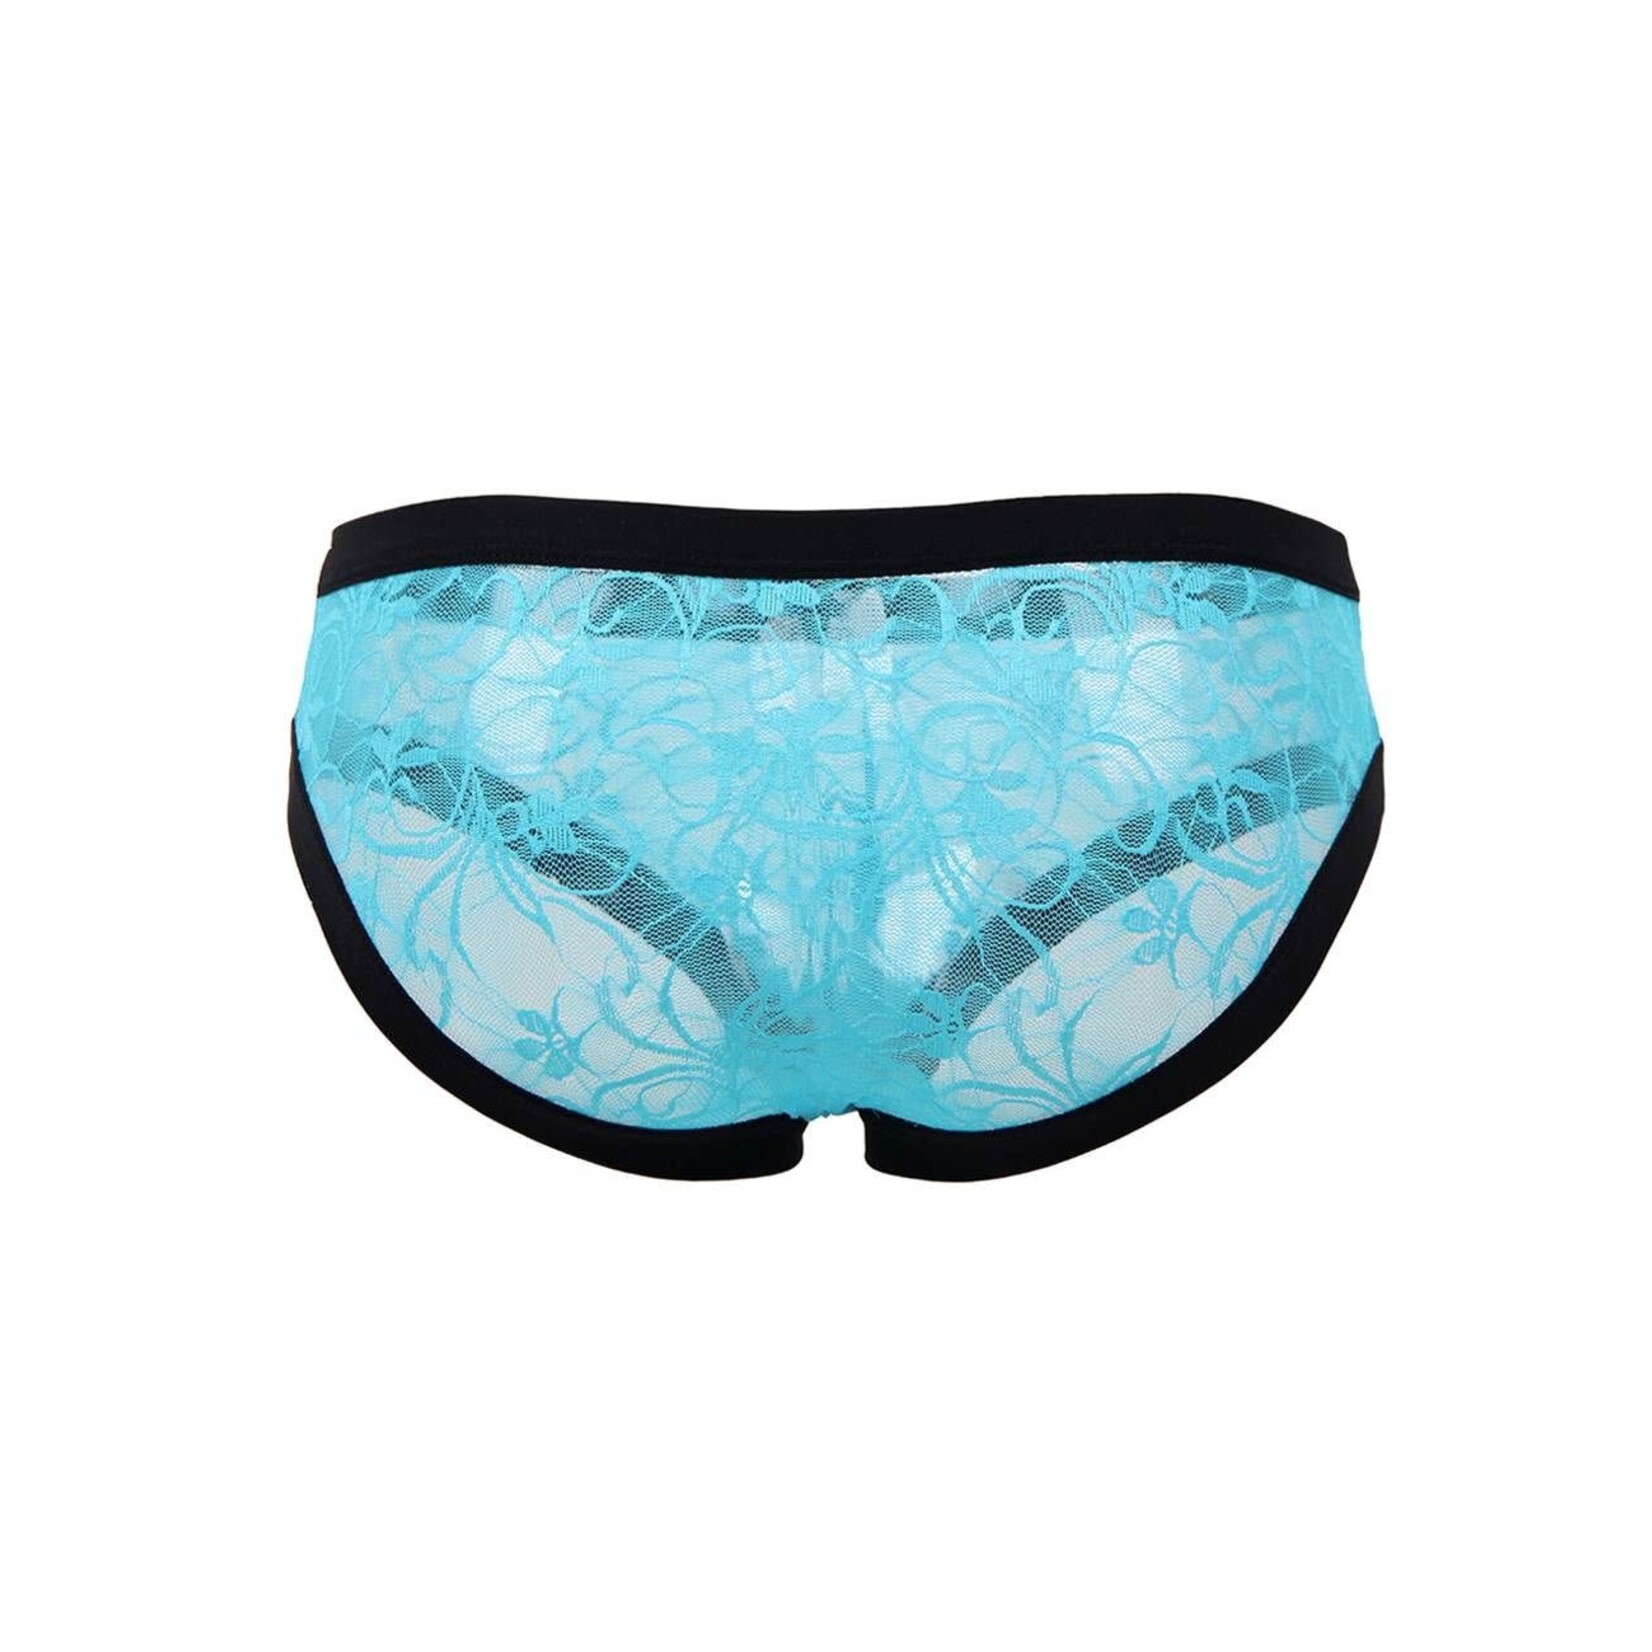 OH YEAH! -  SEXY BLUE LACE PANTY FOR MEN S